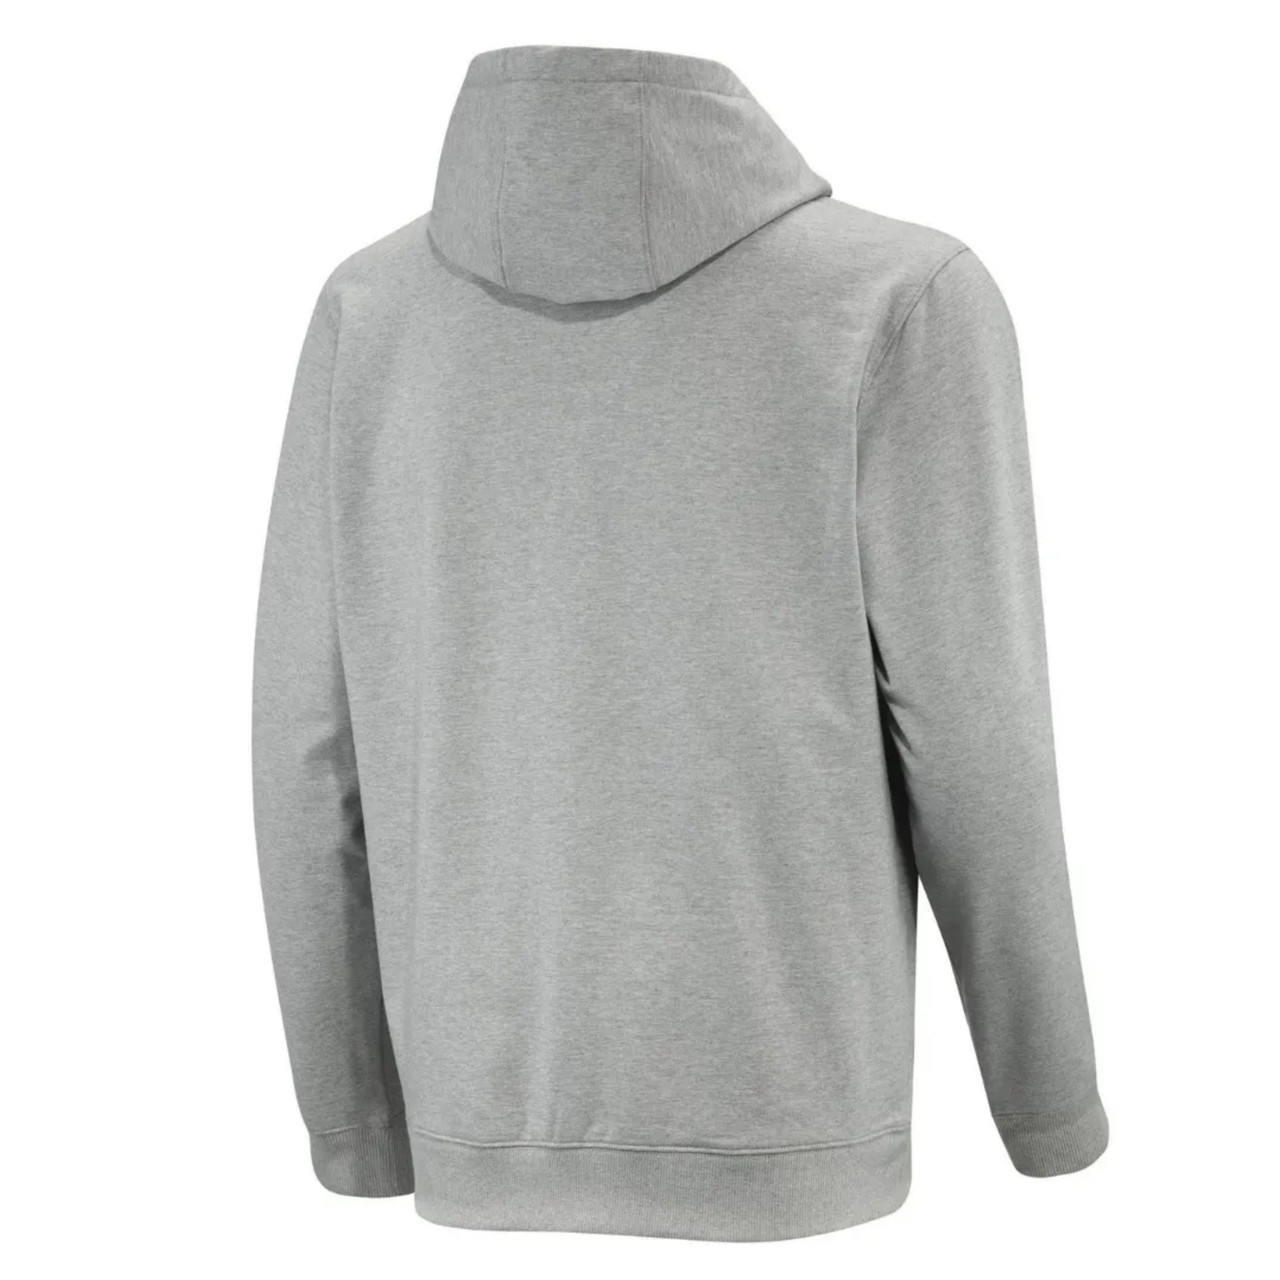 Can-Am New OEM Men's X-Large Heather Grey Premium Pullover Hoodie, 4545451227